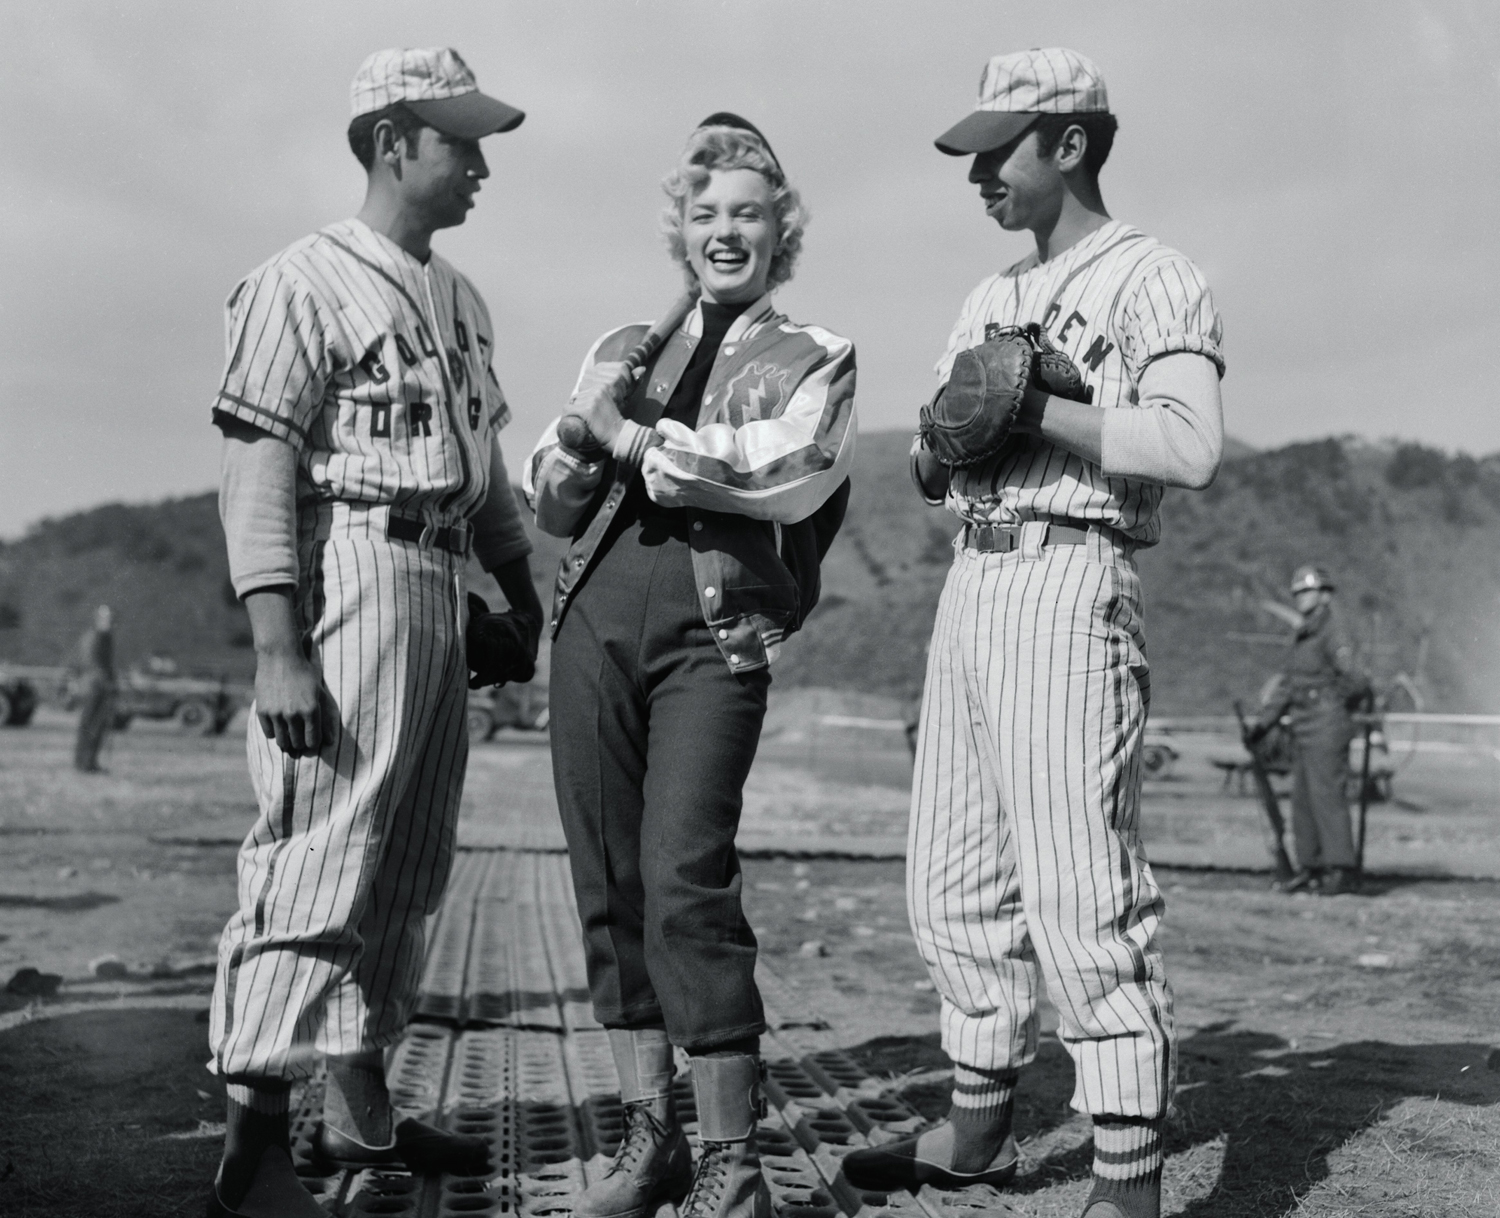 In South Korea in 1954, Monroe poses with baseball players.